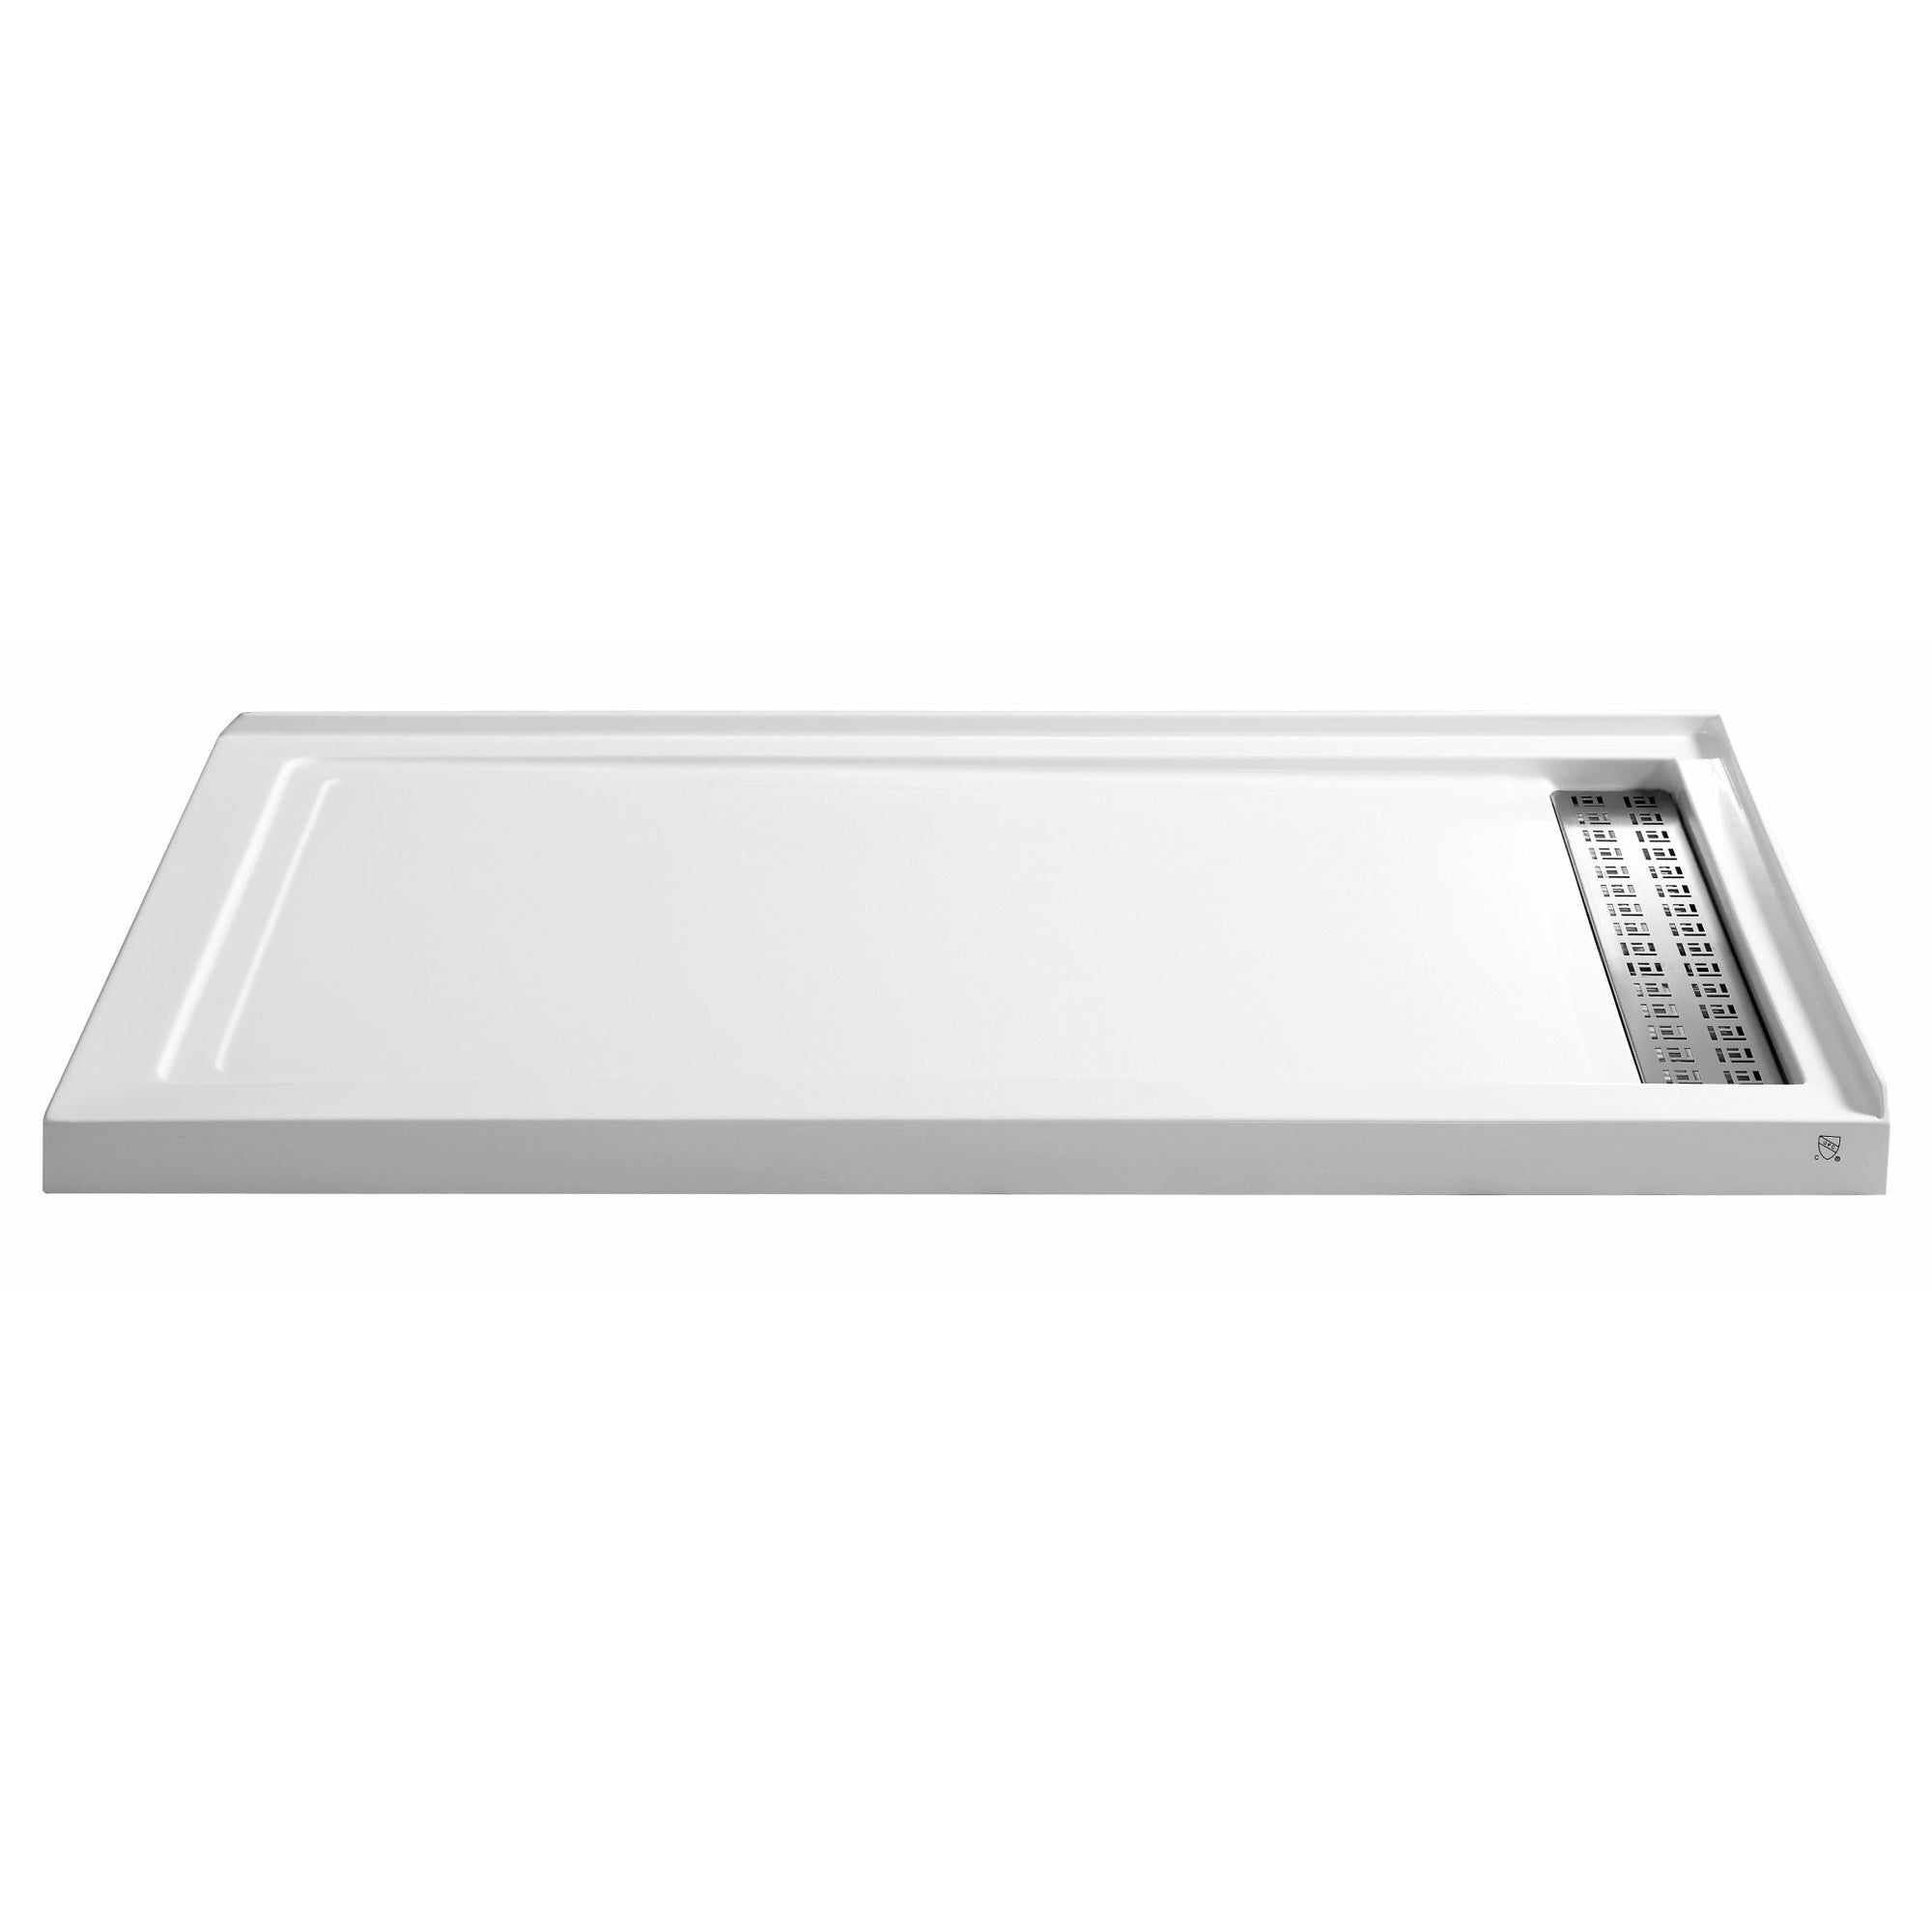 Anzzi Field Series 60 in. x 36 in. Shower Base in Marine Grade Acrylic in Bright and Vibrant White Finish - Rectangular Shape - SB-AZ012WR - Vital Hydrotherapy